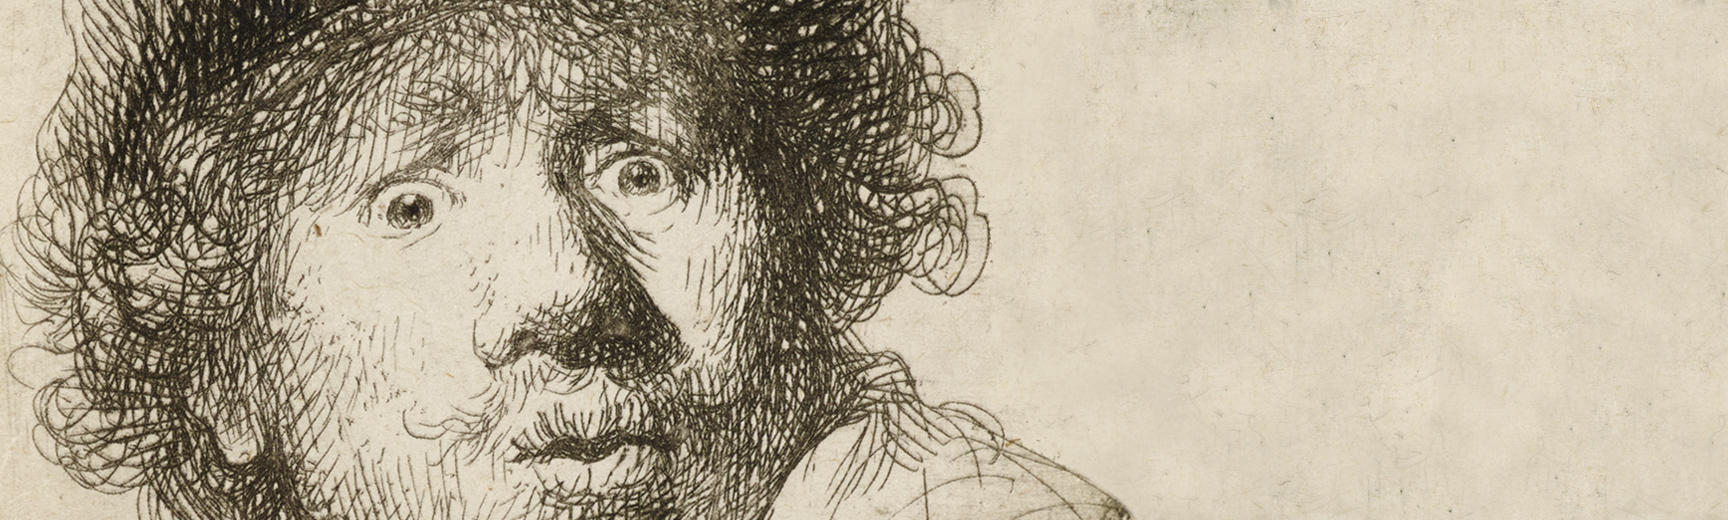 Detail from an etching of a self portrait of a young Rembrandt, made 1630